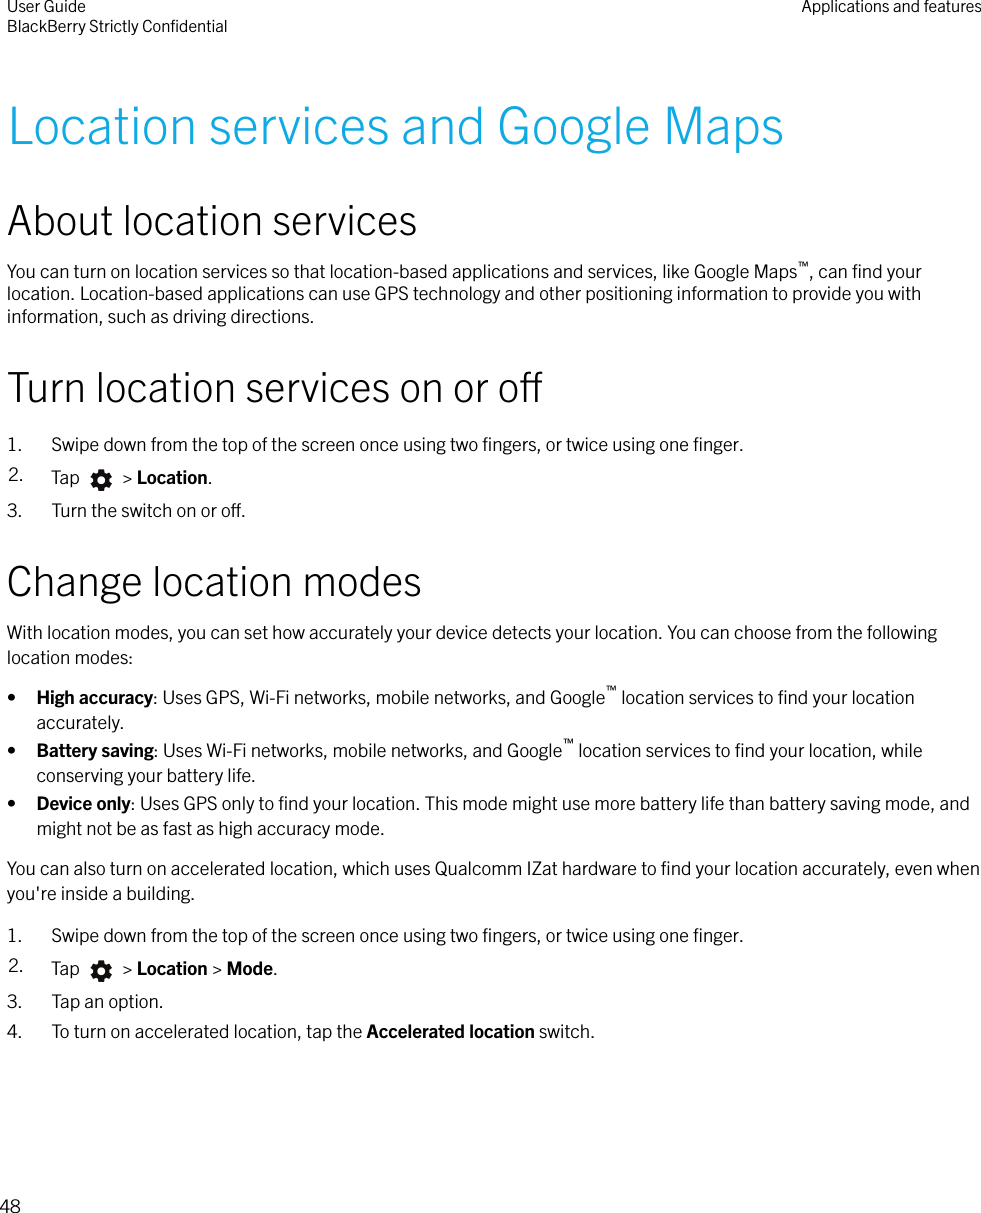 Location services and Google MapsAbout location servicesYou can turn on location services so that location-based applications and services, like Google Maps™, can ﬁnd yourlocation. Location-based applications can use GPS technology and other positioning information to provide you withinformation, such as driving directions.Turn location services on or o1. Swipe down from the top of the screen once using two ﬁngers, or twice using one ﬁnger.2. Tap   &gt; Location.3. Turn the switch on or o.Change location modesWith location modes, you can set how accurately your device detects your location. You can choose from the followinglocation modes:•High accuracy: Uses GPS, Wi-Fi networks, mobile networks, and Google™ location services to ﬁnd your locationaccurately.•Battery saving: Uses Wi-Fi networks, mobile networks, and Google™ location services to ﬁnd your location, whileconserving your battery life.•Device only: Uses GPS only to ﬁnd your location. This mode might use more battery life than battery saving mode, andmight not be as fast as high accuracy mode.You can also turn on accelerated location, which uses Qualcomm IZat hardware to ﬁnd your location accurately, even whenyou&apos;re inside a building.1. Swipe down from the top of the screen once using two ﬁngers, or twice using one ﬁnger.2. Tap   &gt; Location &gt; Mode.3. Tap an option.4. To turn on accelerated location, tap the Accelerated location switch.User GuideBlackBerry Strictly ConﬁdentialApplications and features48